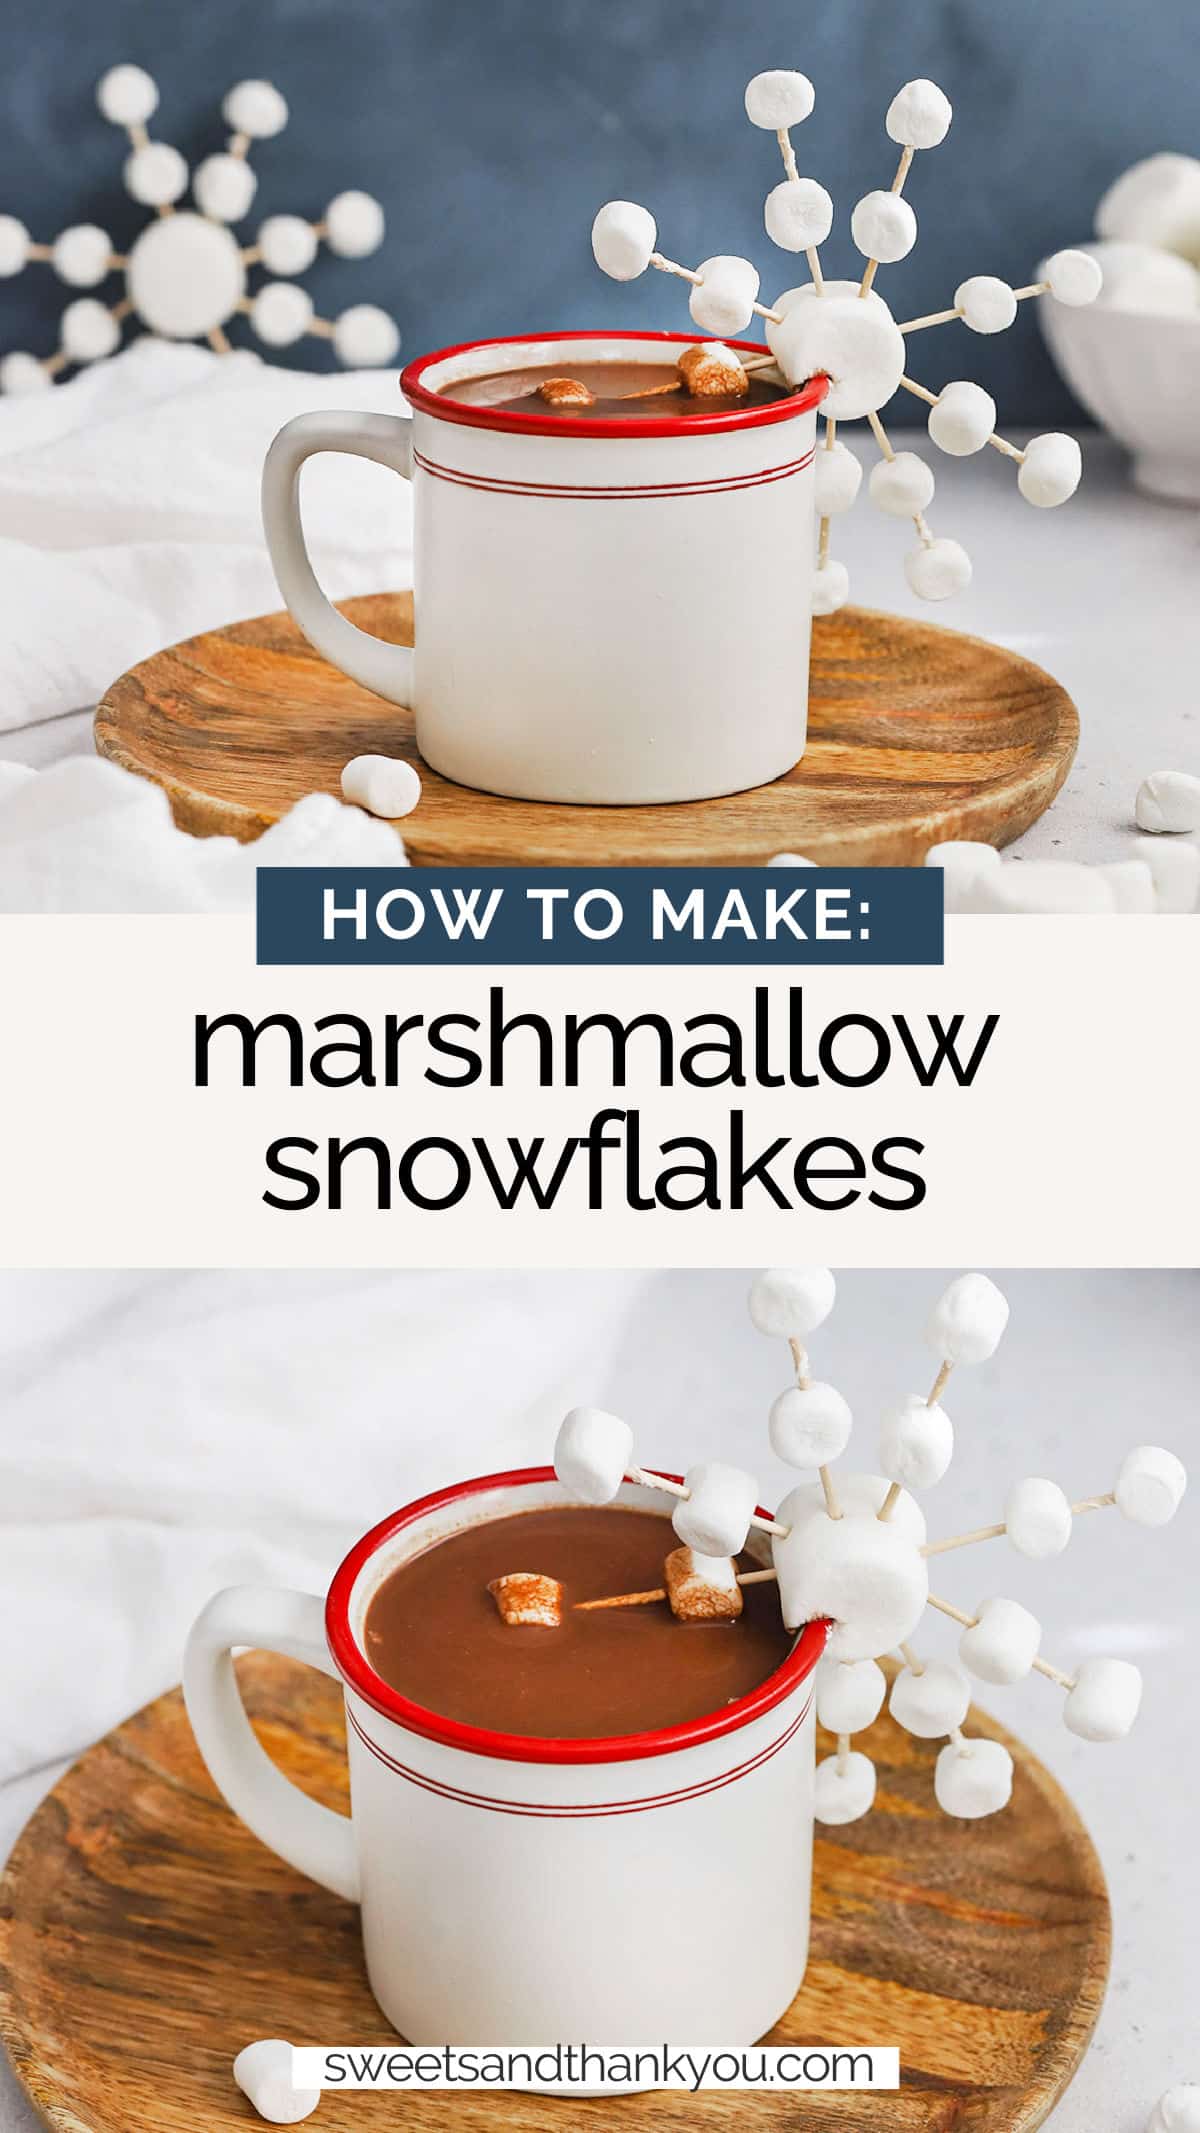 How To Make Marshmallow Snowflakes - Learn how to make marshmallow and toothpick snowflakes to decorate your next mug of hot cocoa! It only takes minutes & it's so fun! // marshmallow craft // hot chocolate topping // winter activity for kids // snow activity for kids // kids craft // marshmallow art // hot cocoa topping // gluten free recipe // snowflake STEM activity // winter STEM activity // snowflake marshmallows / 